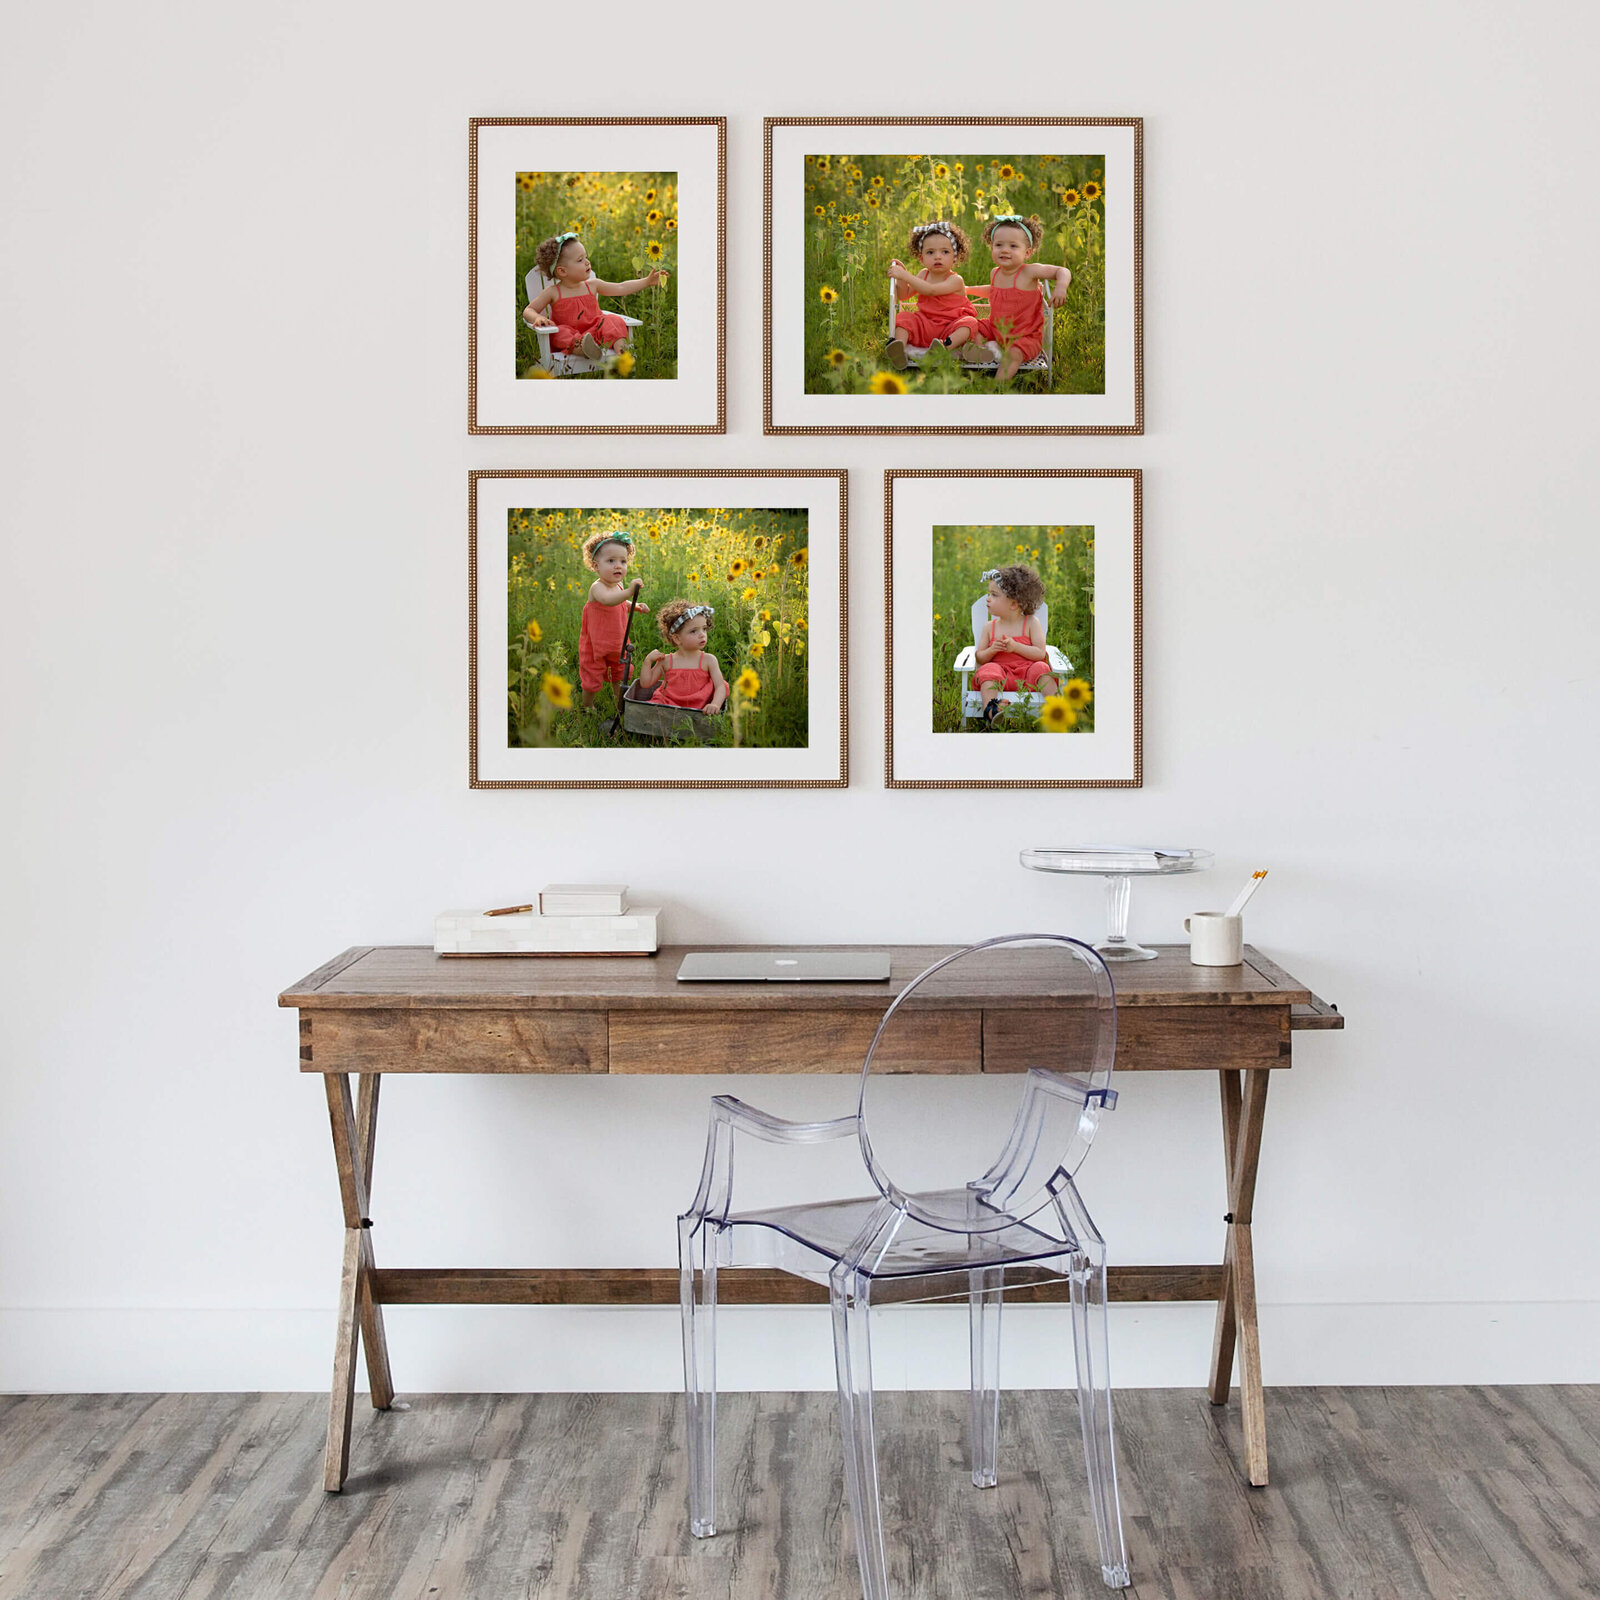 East-Brunswick-NJ-Photographer 24x20 with matted 20x16 prints and 16x20 with matted 11x14 prints above study desk